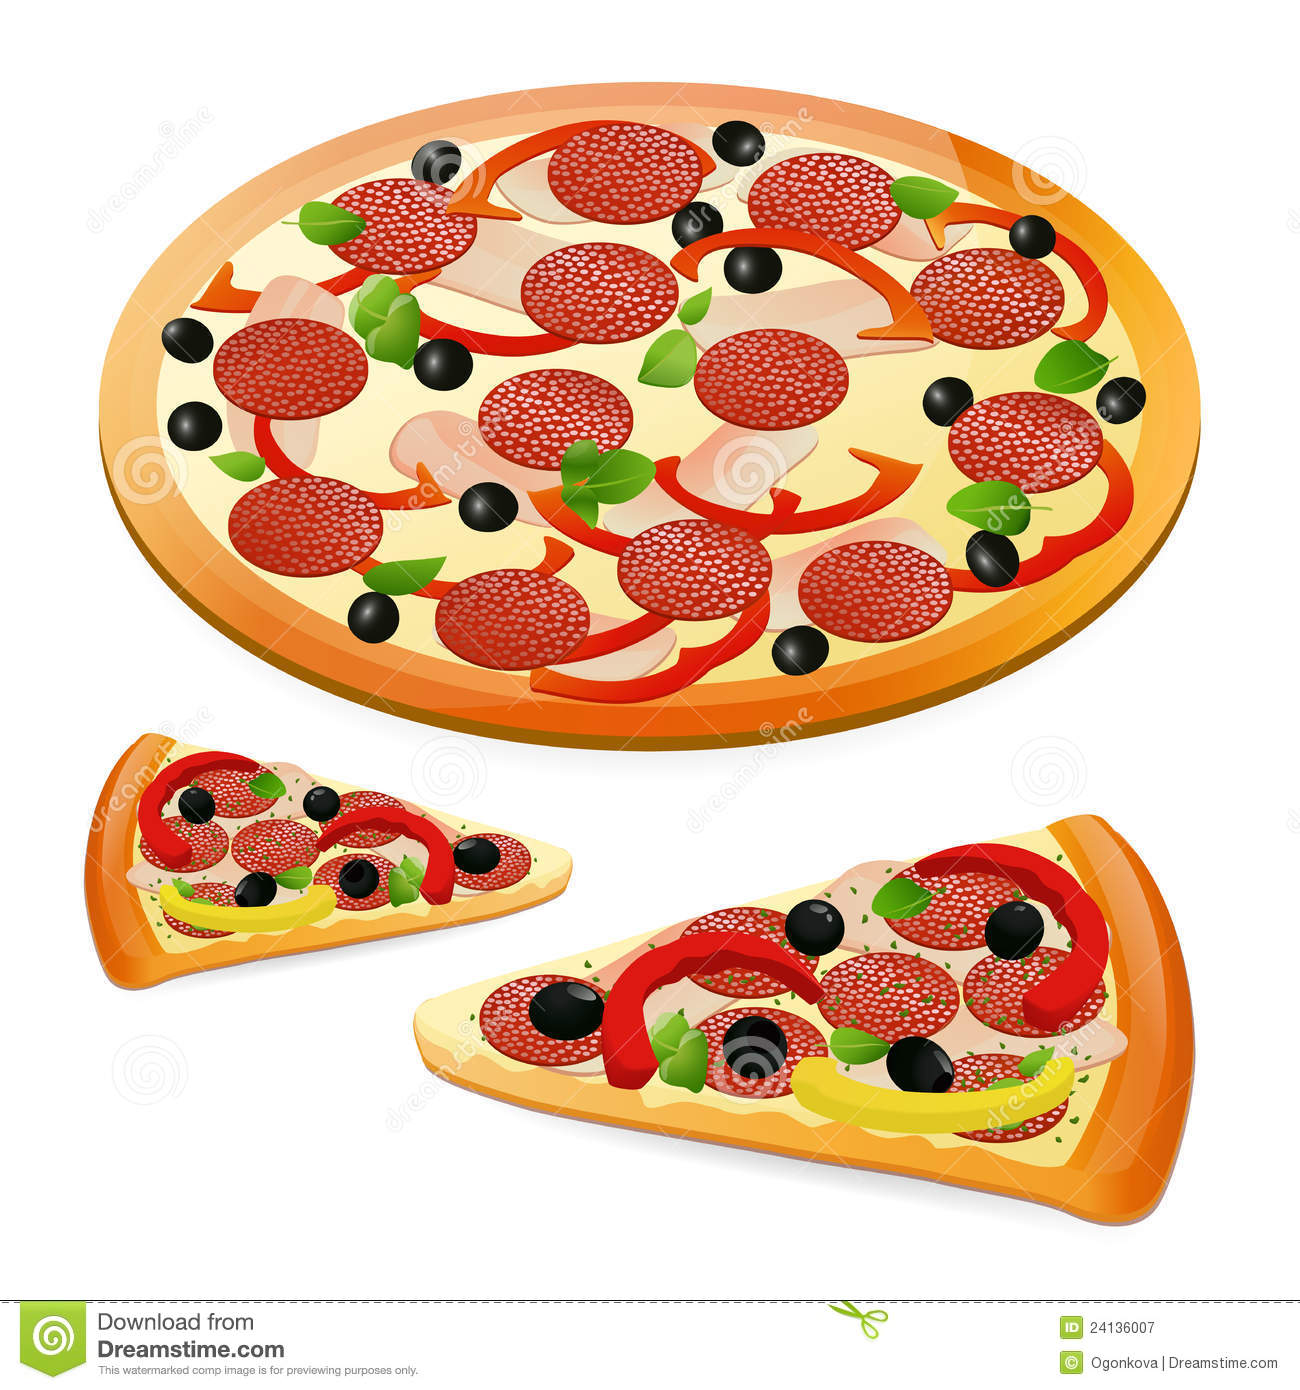 Pizza royalty free stock photography image